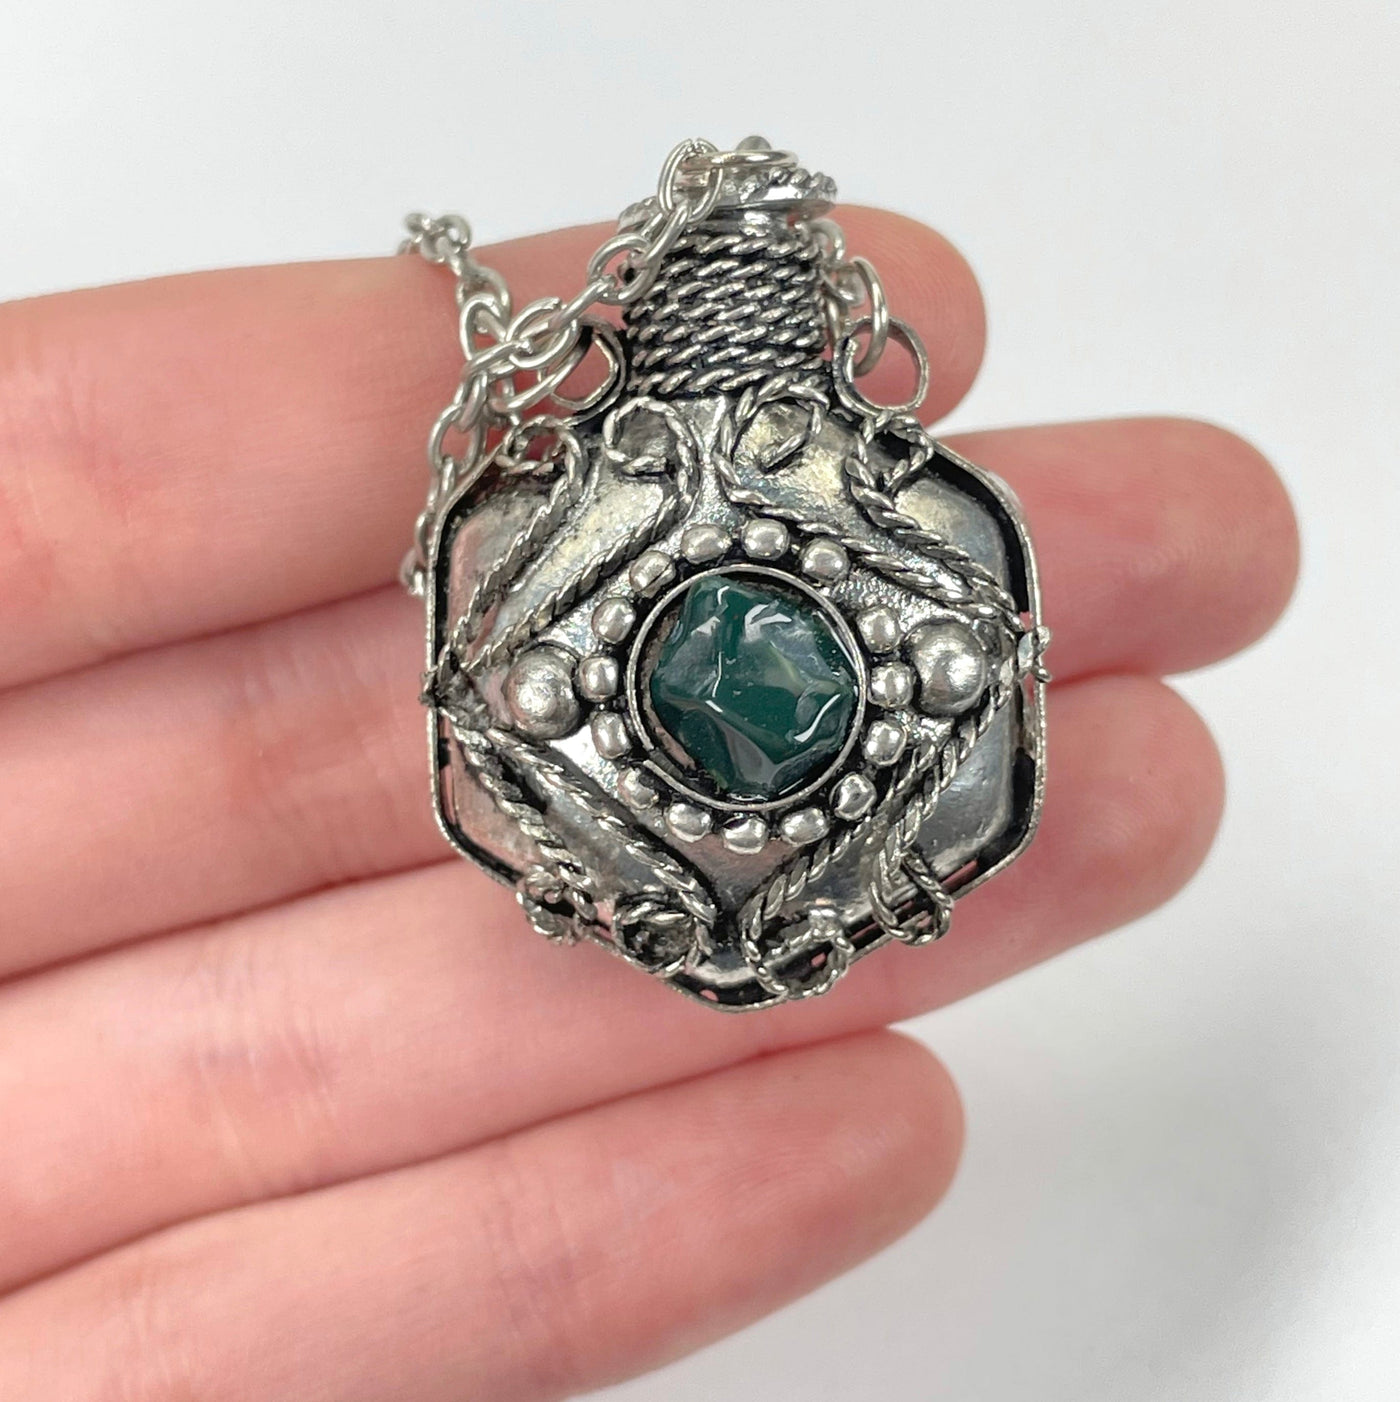 close up of bloodstone bottle pendant necklace in hand for size reference and details